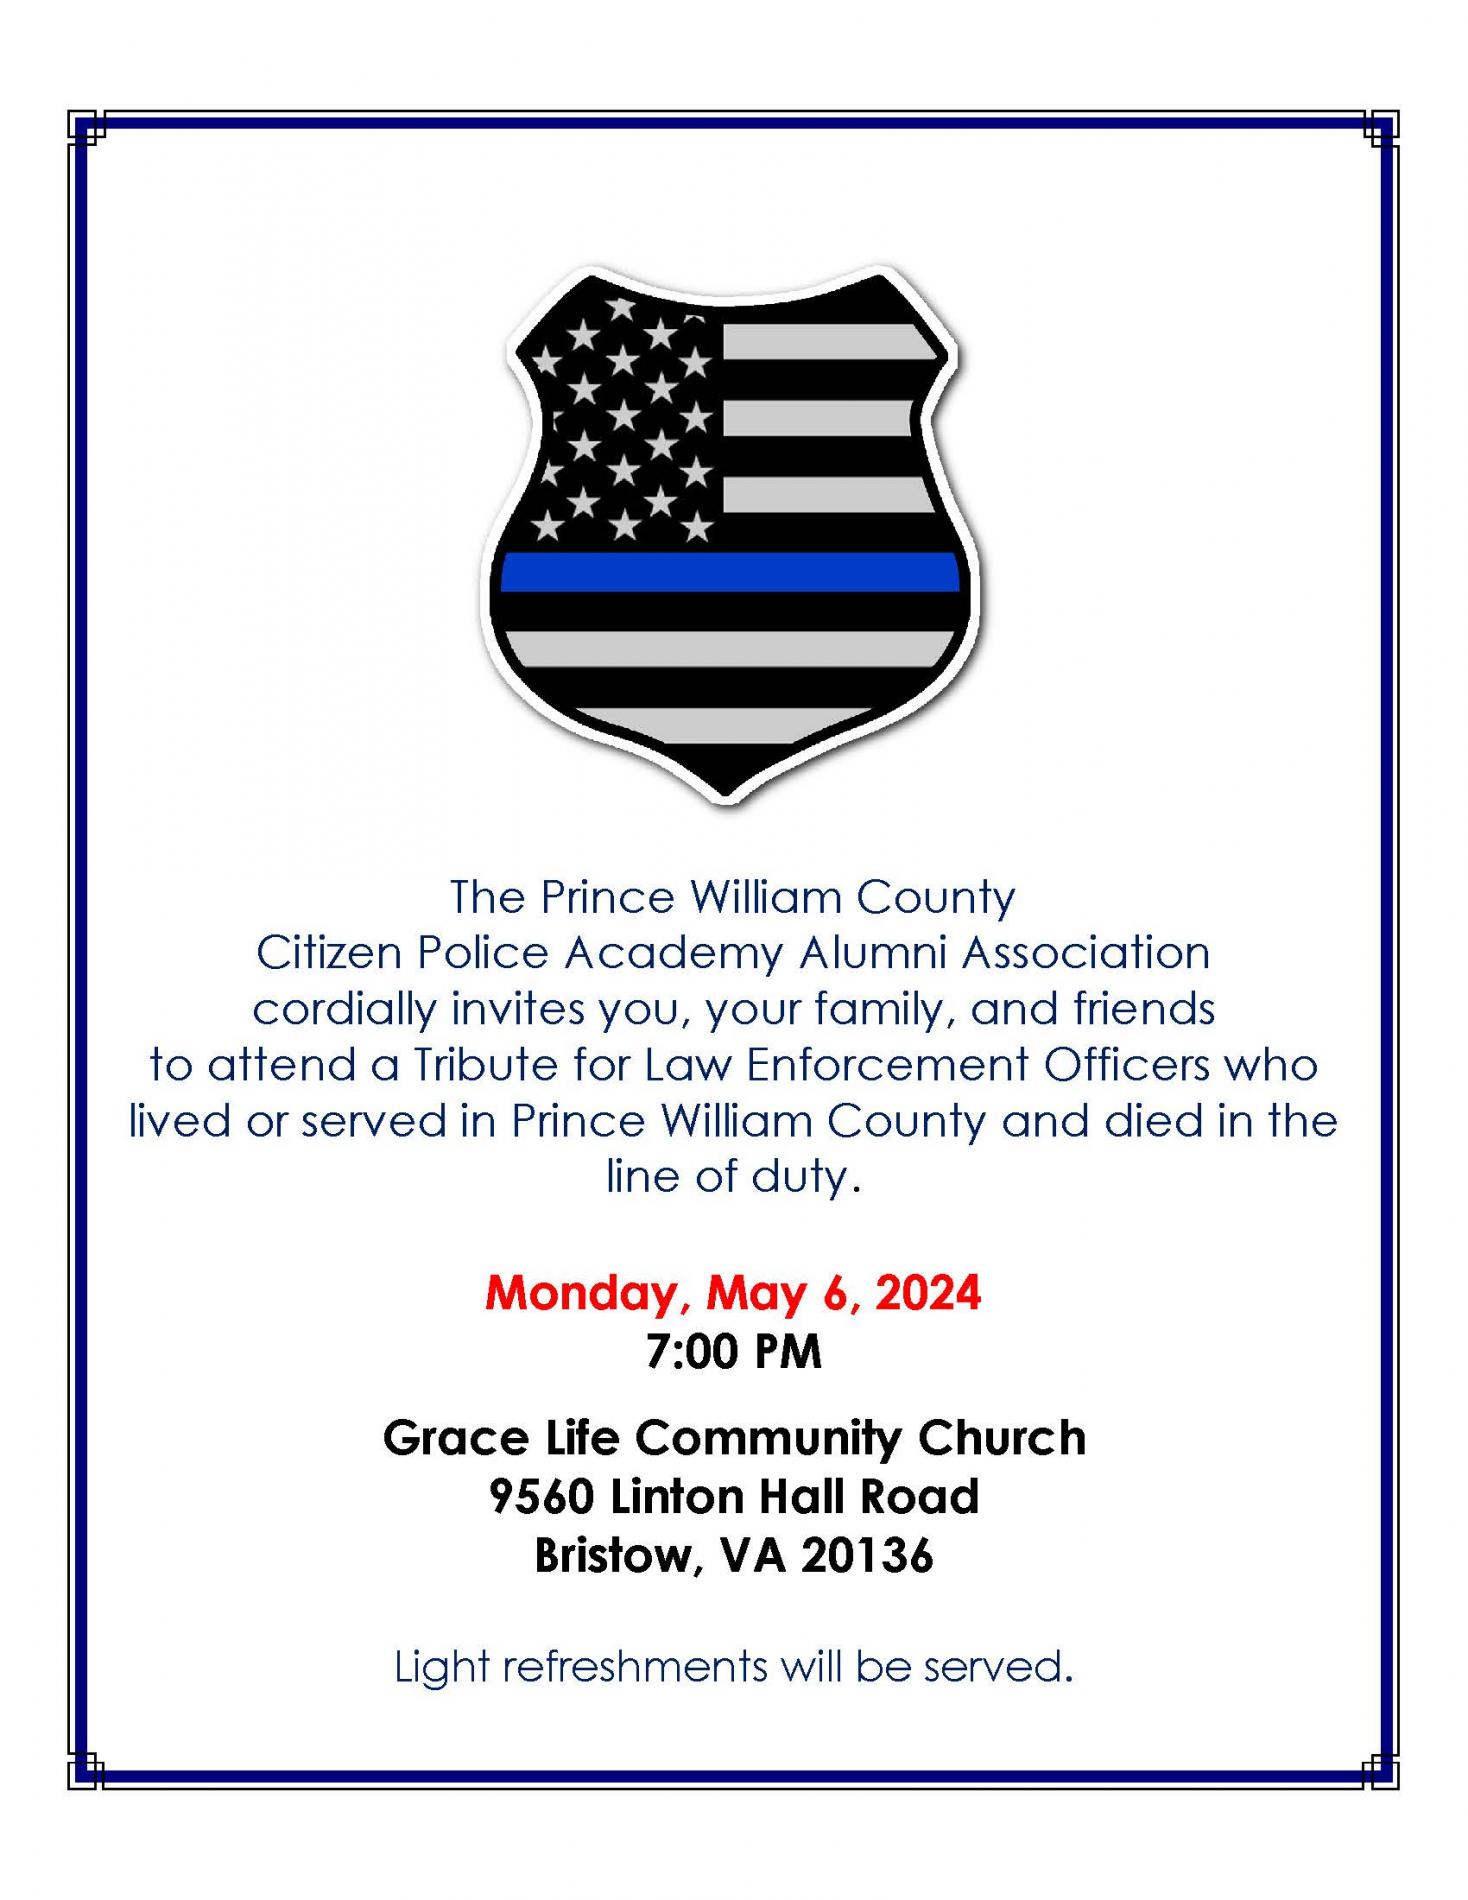 Flier about Candlelight Vigil and Tribute for Fallen Officers on May 6, 2024